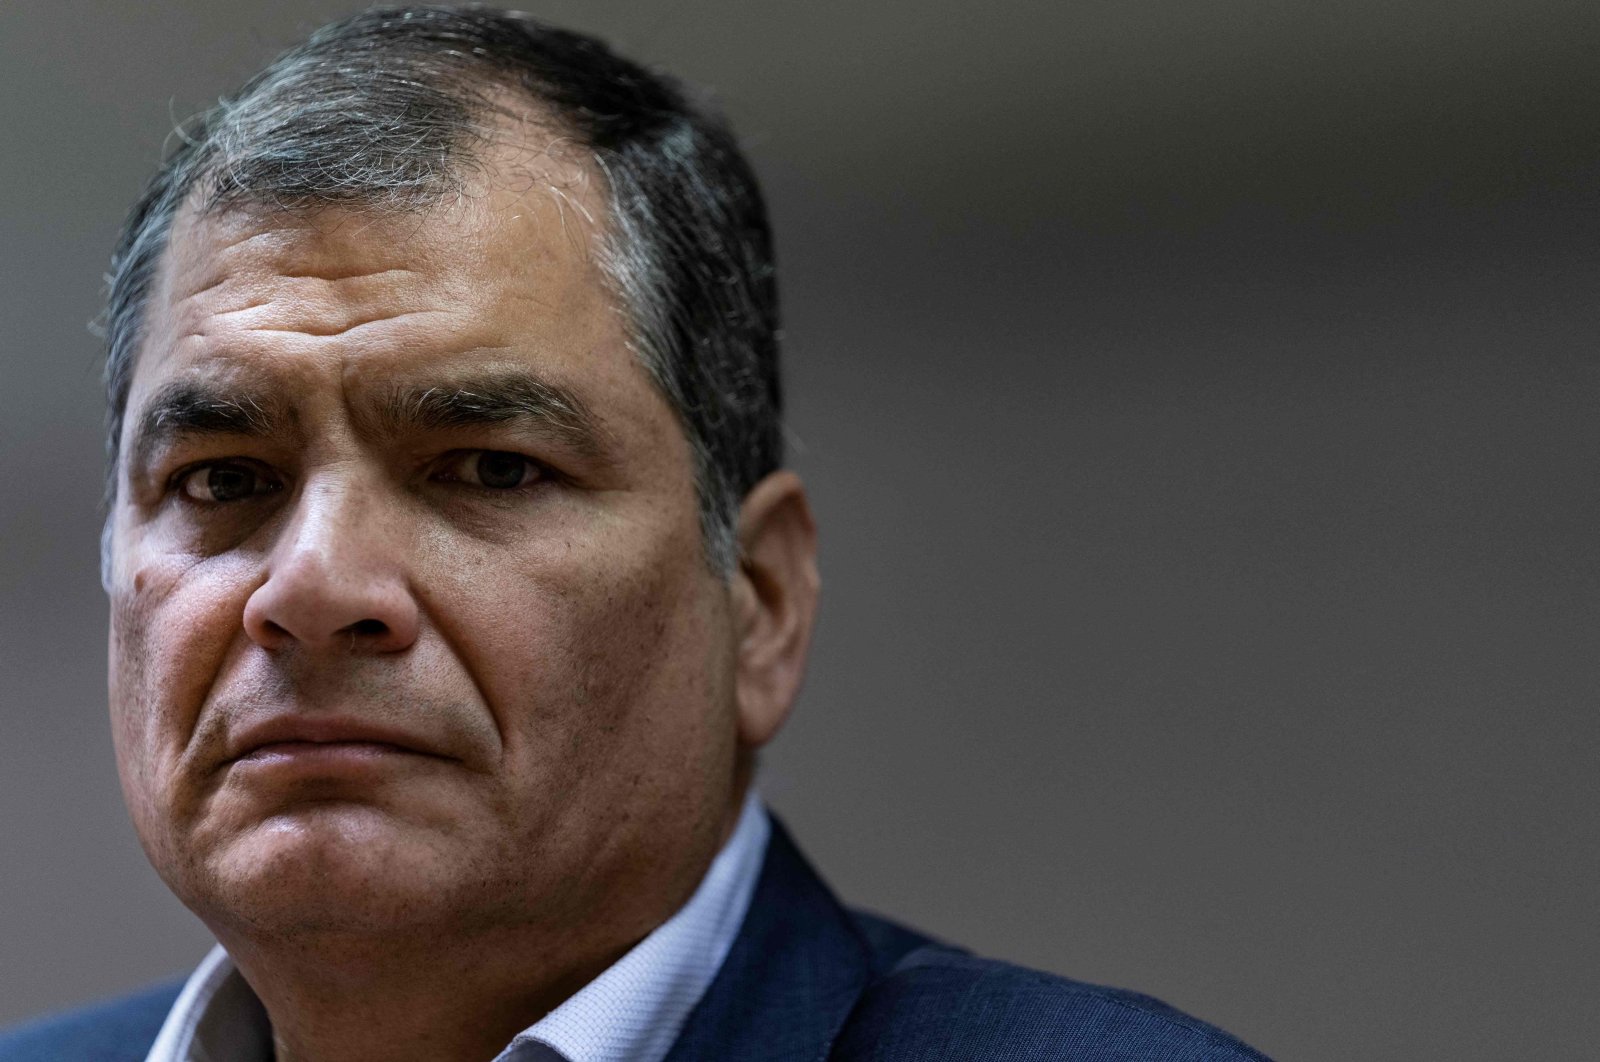 Ecuador&#039;s former President (2007-2017) Rafael Correa gives a press conference at the European Parliament in Brussels, Belgium, Oct. 9, 2019. (AFP Photo)